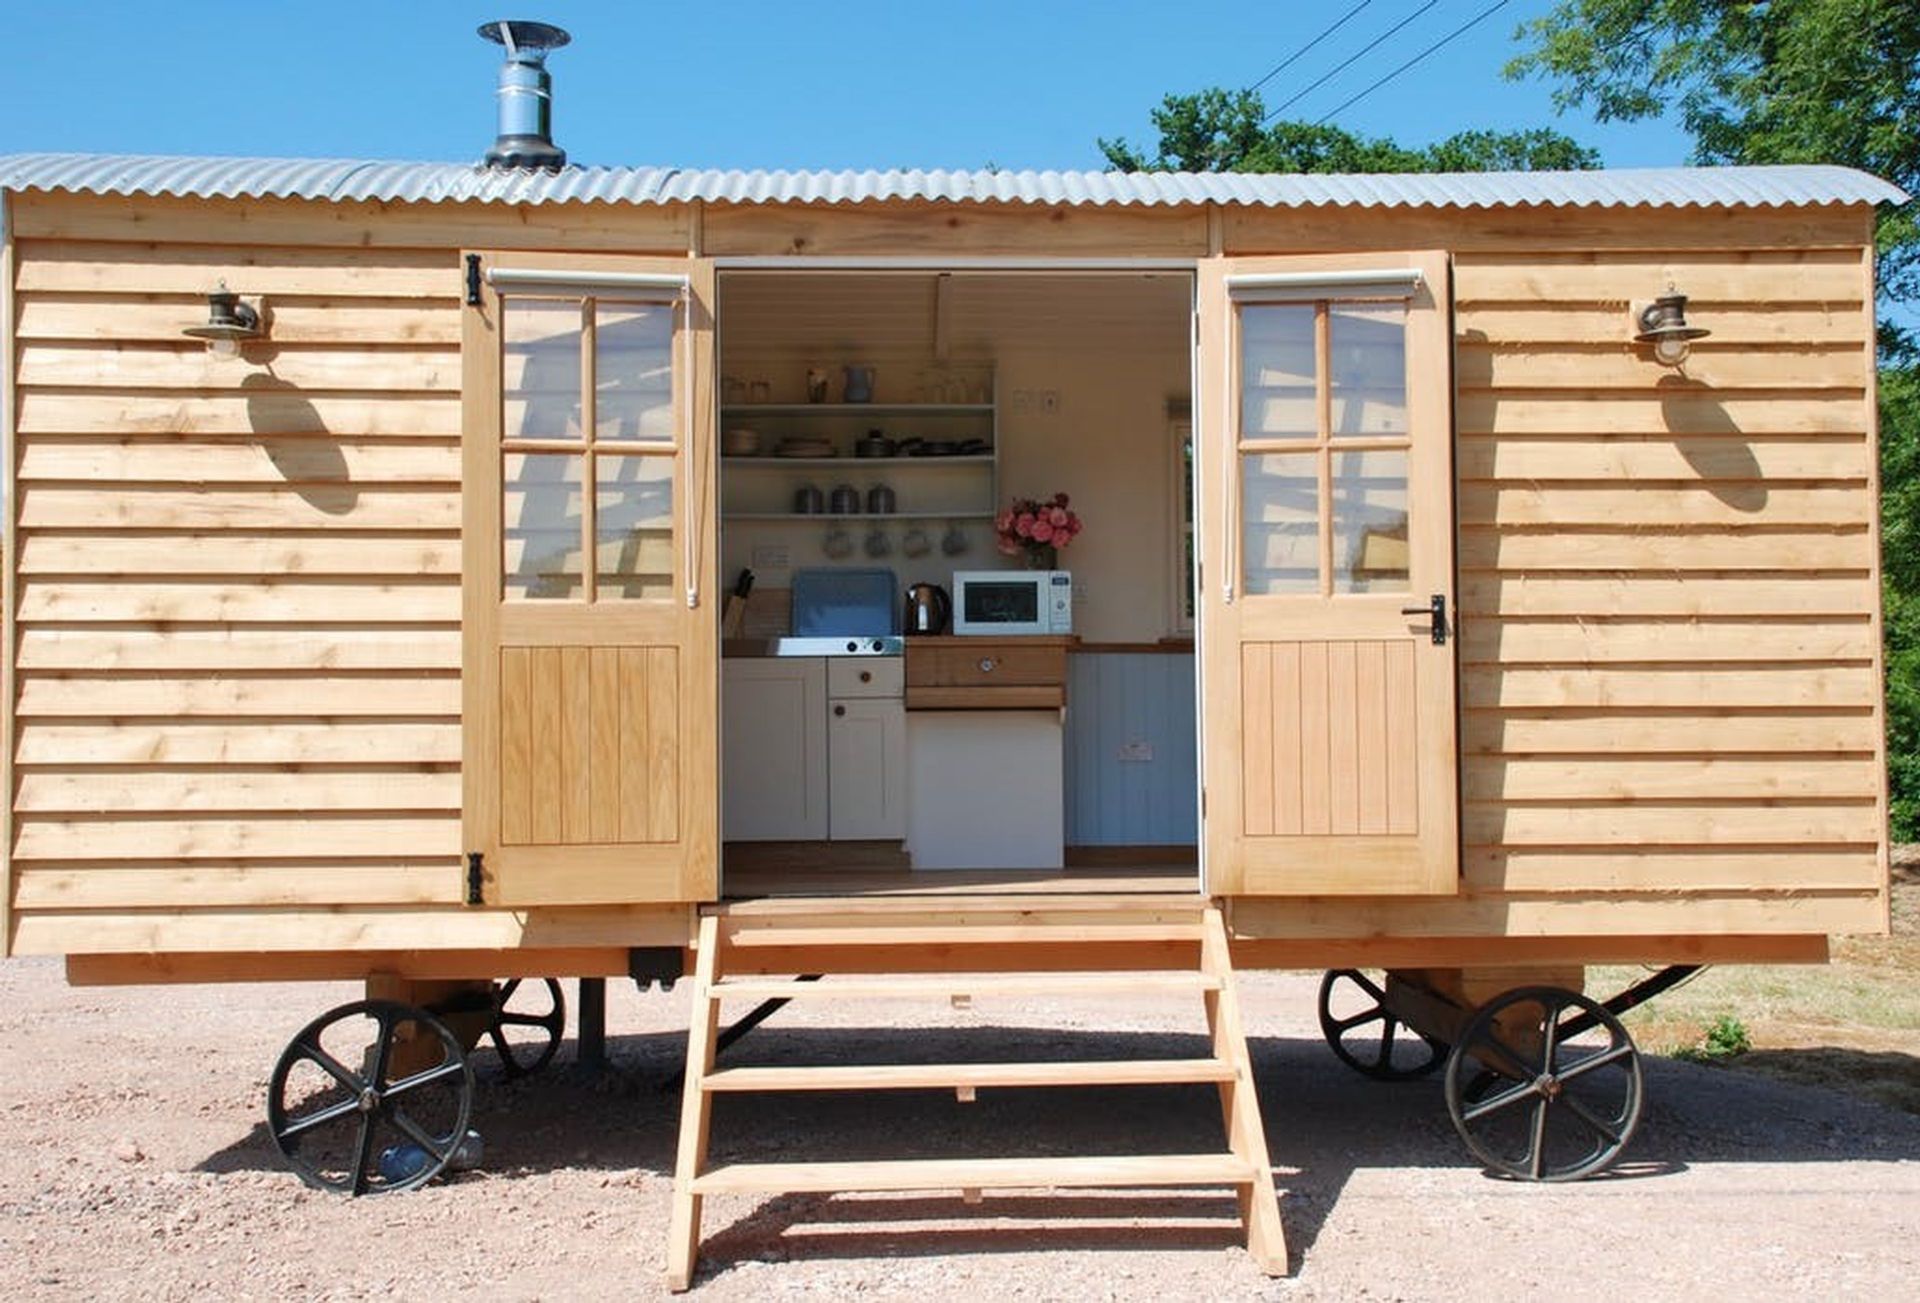 Details about a cottage Holiday at Apple the shepherd's hut